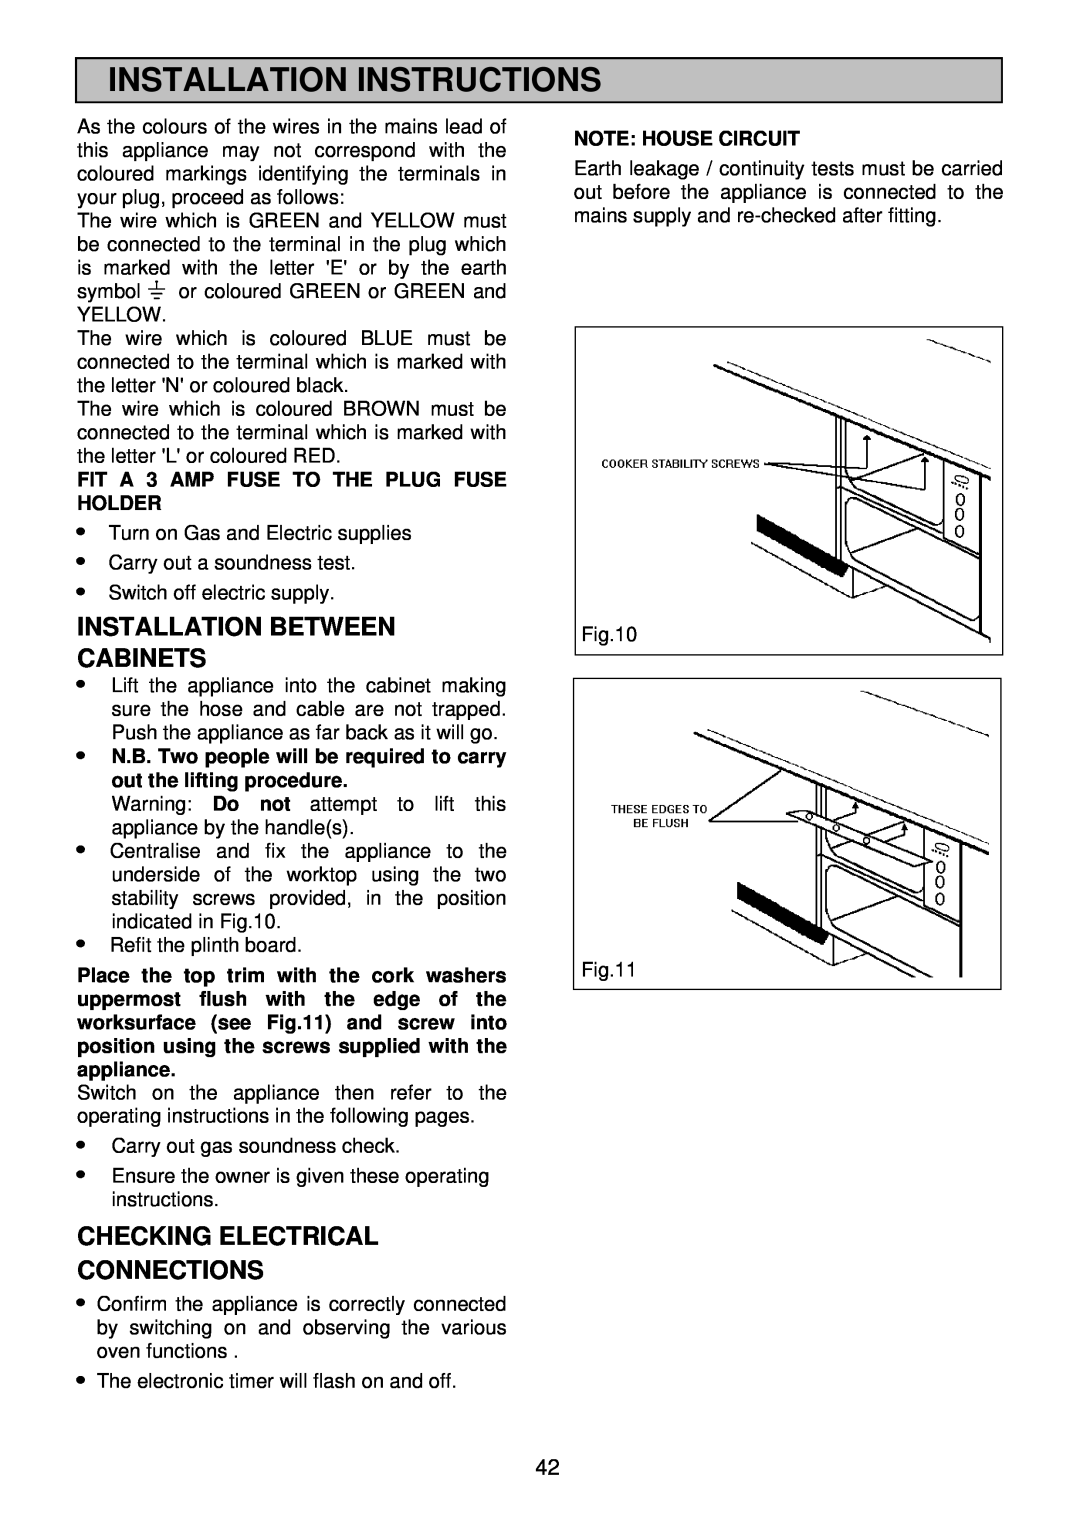 Electrolux EDB 876 manual Installation Between Cabinets, Checking Electrical Connections, Installation Instructions 